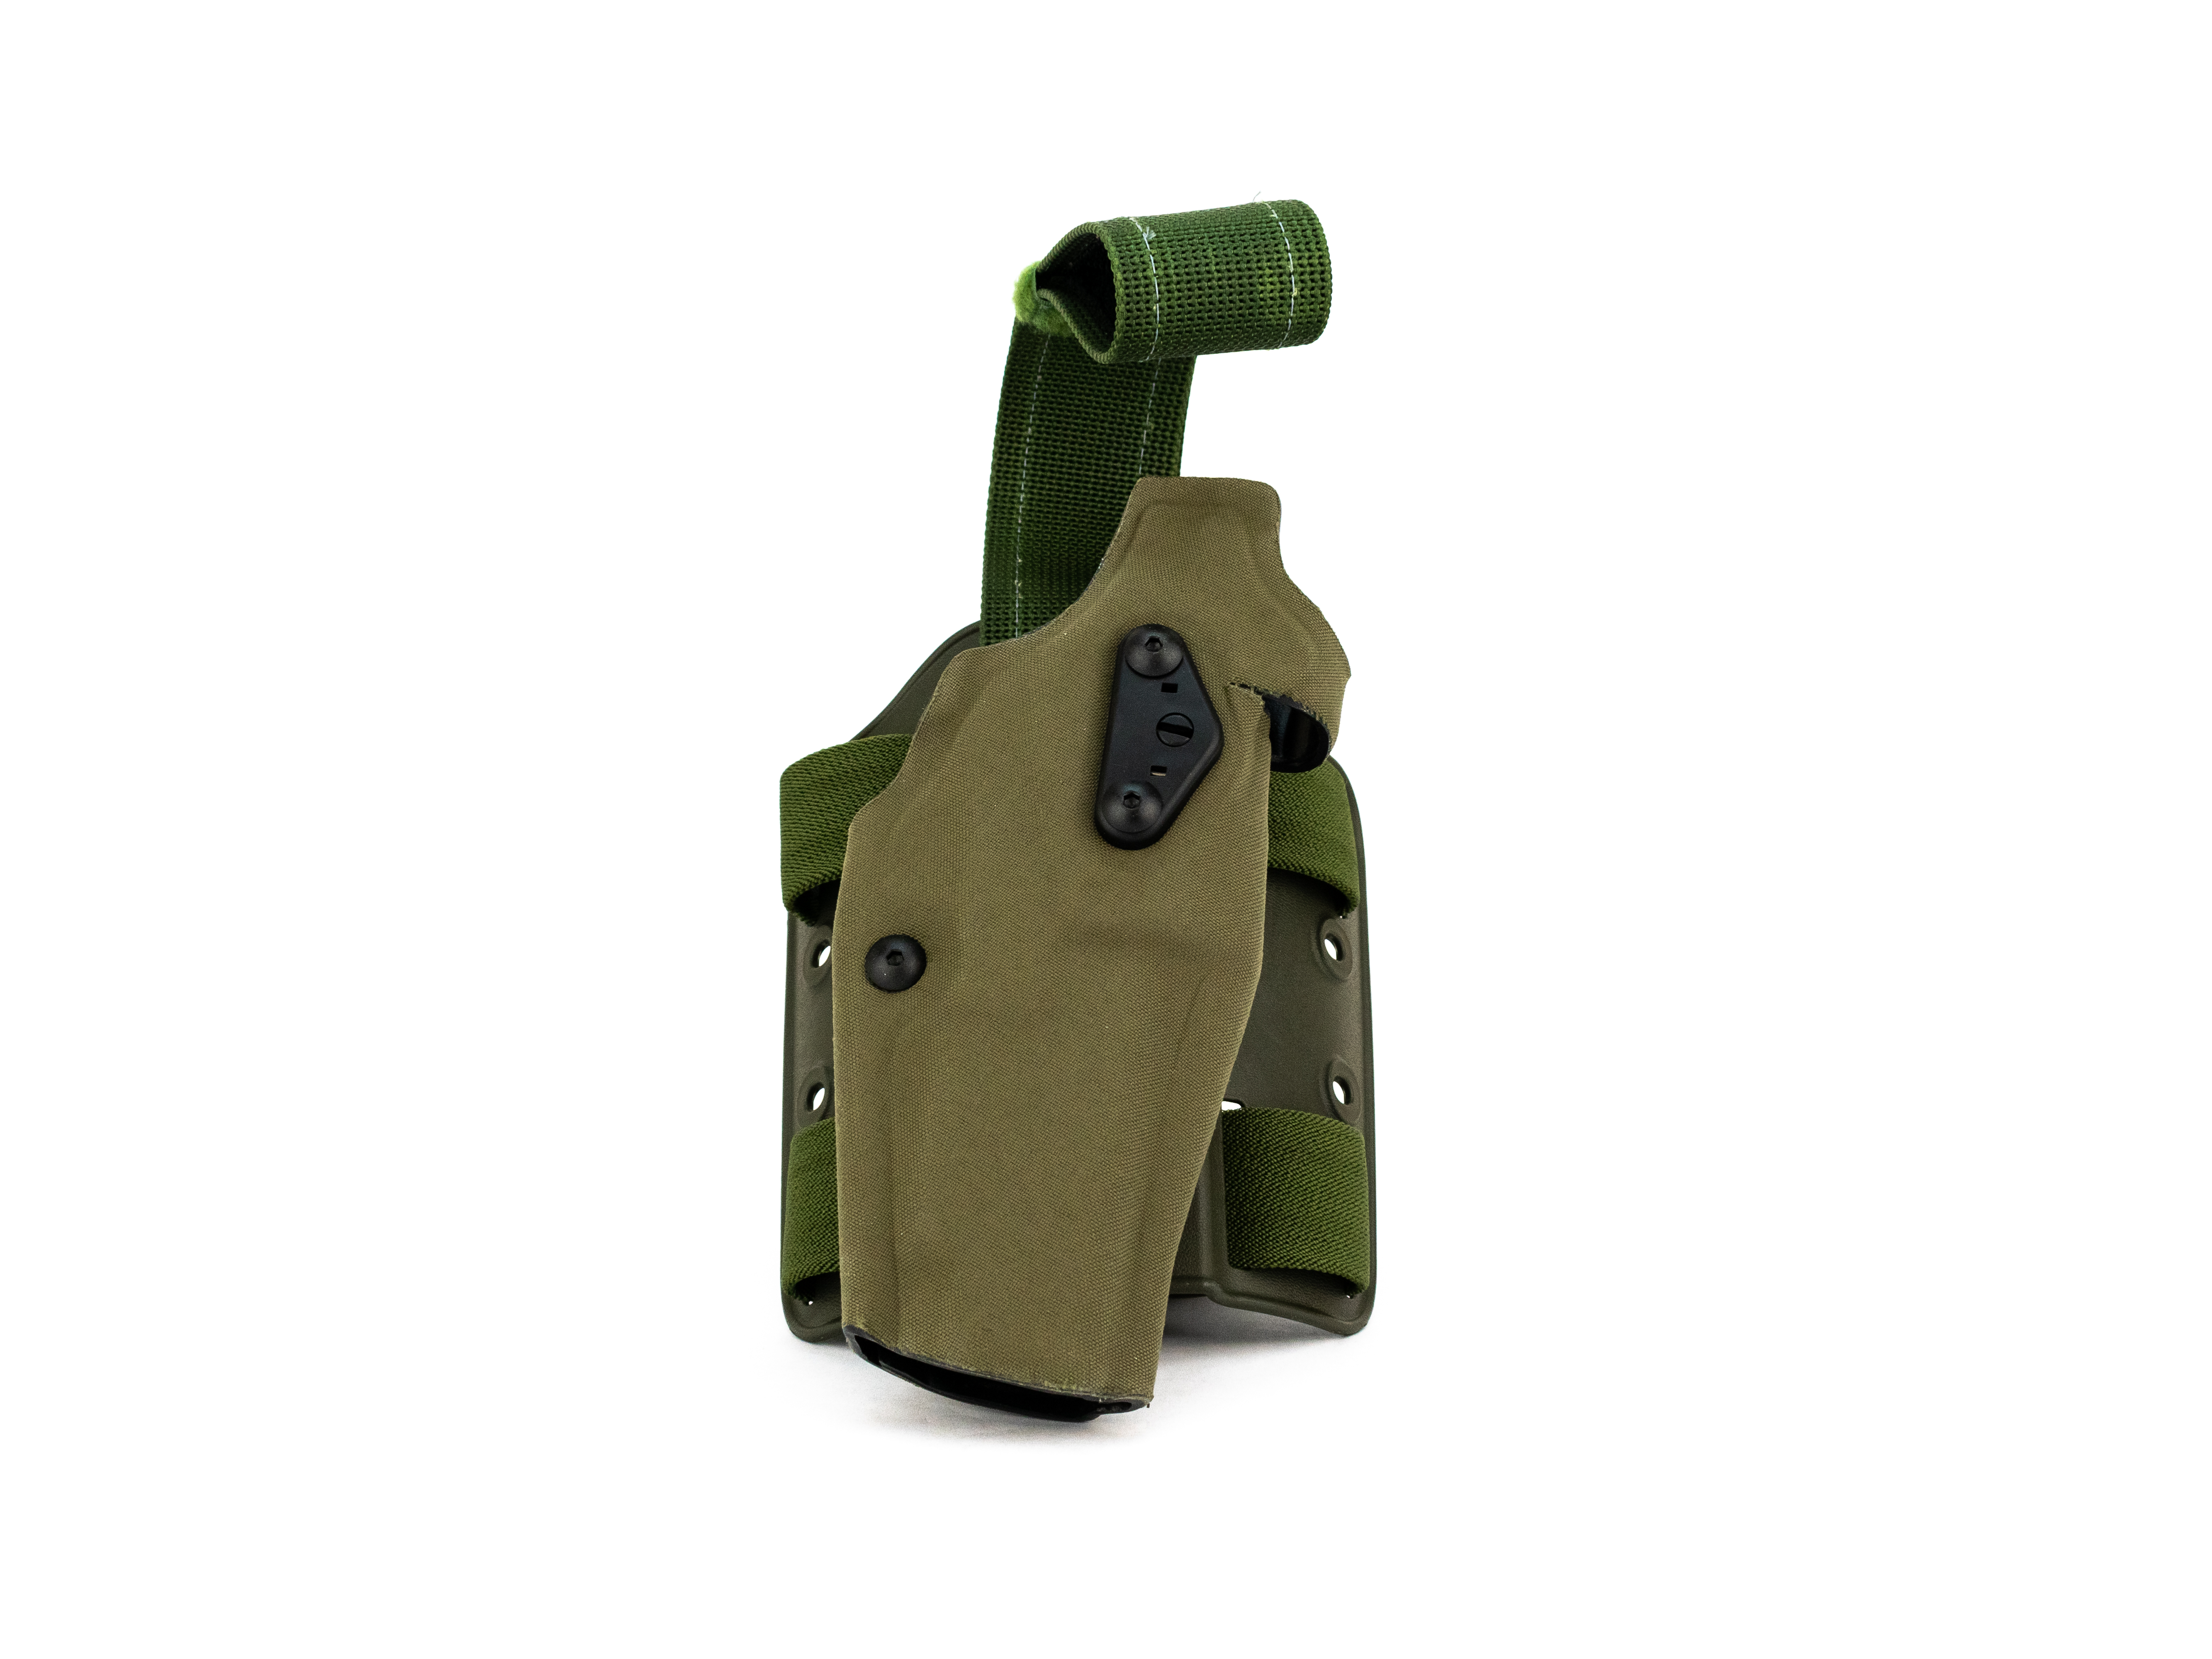 Safariland 6354DO-6832-732-MS19 Green LH Optic Tactical Holster for Glock 34/35 